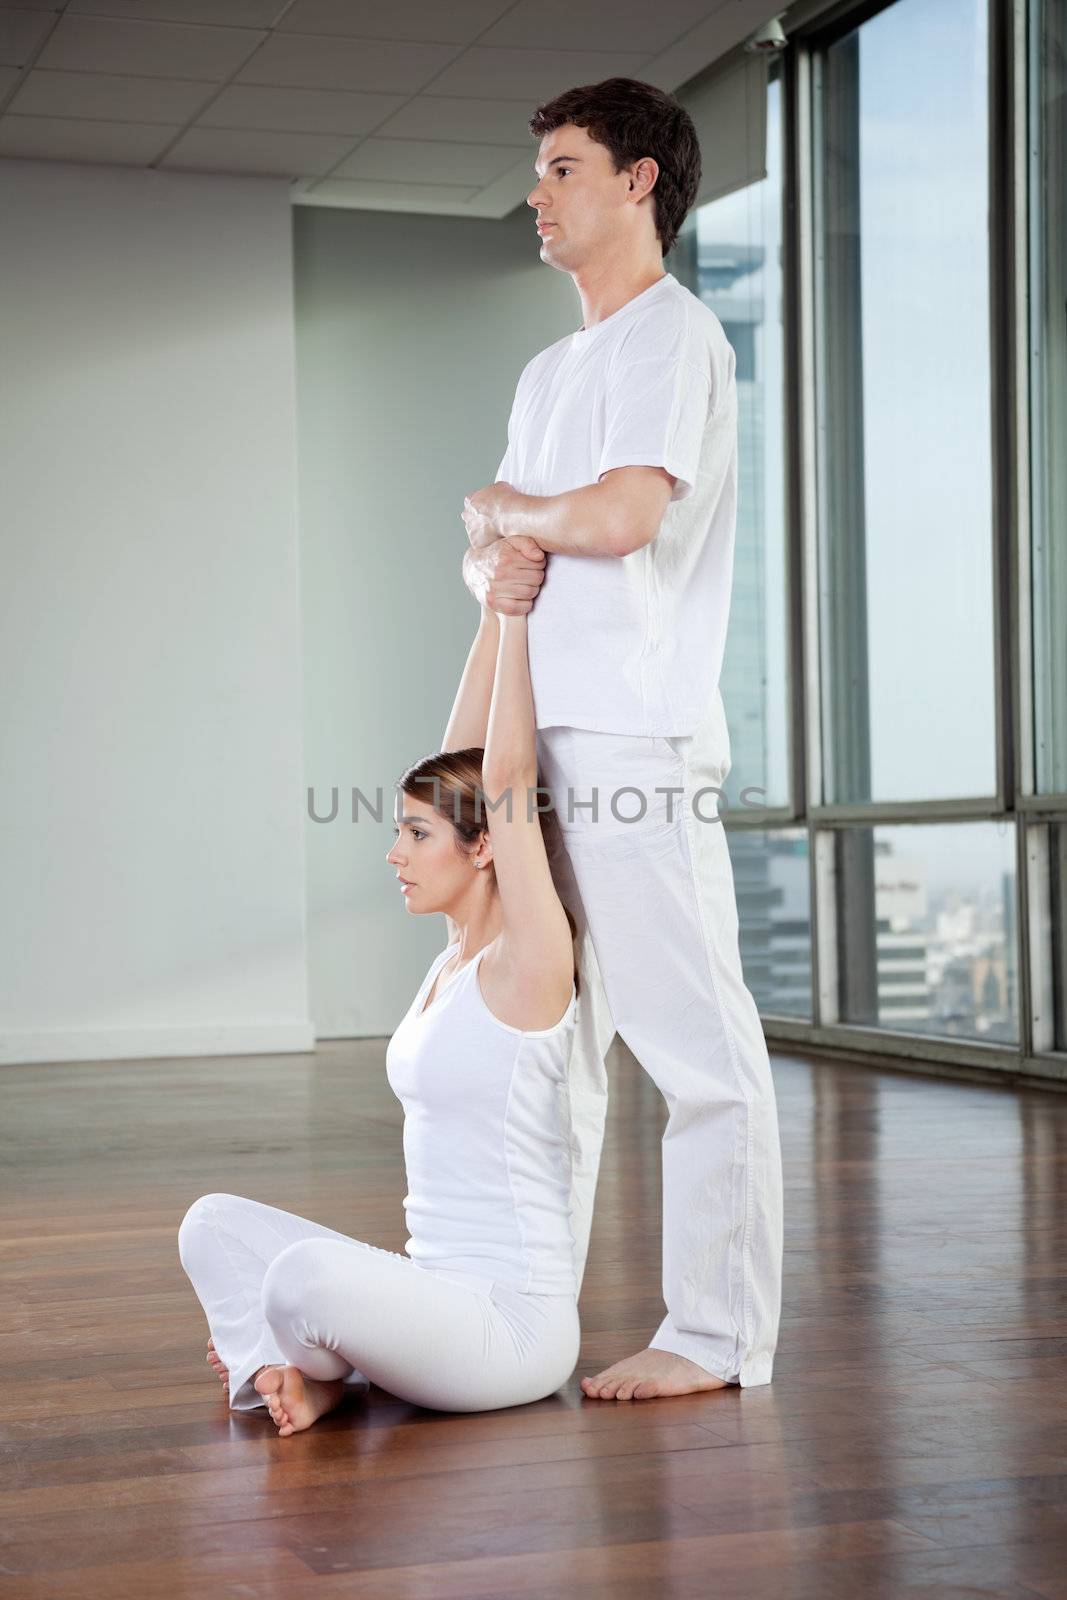 Yoga instructor teaching yoga positions to young woman at gym